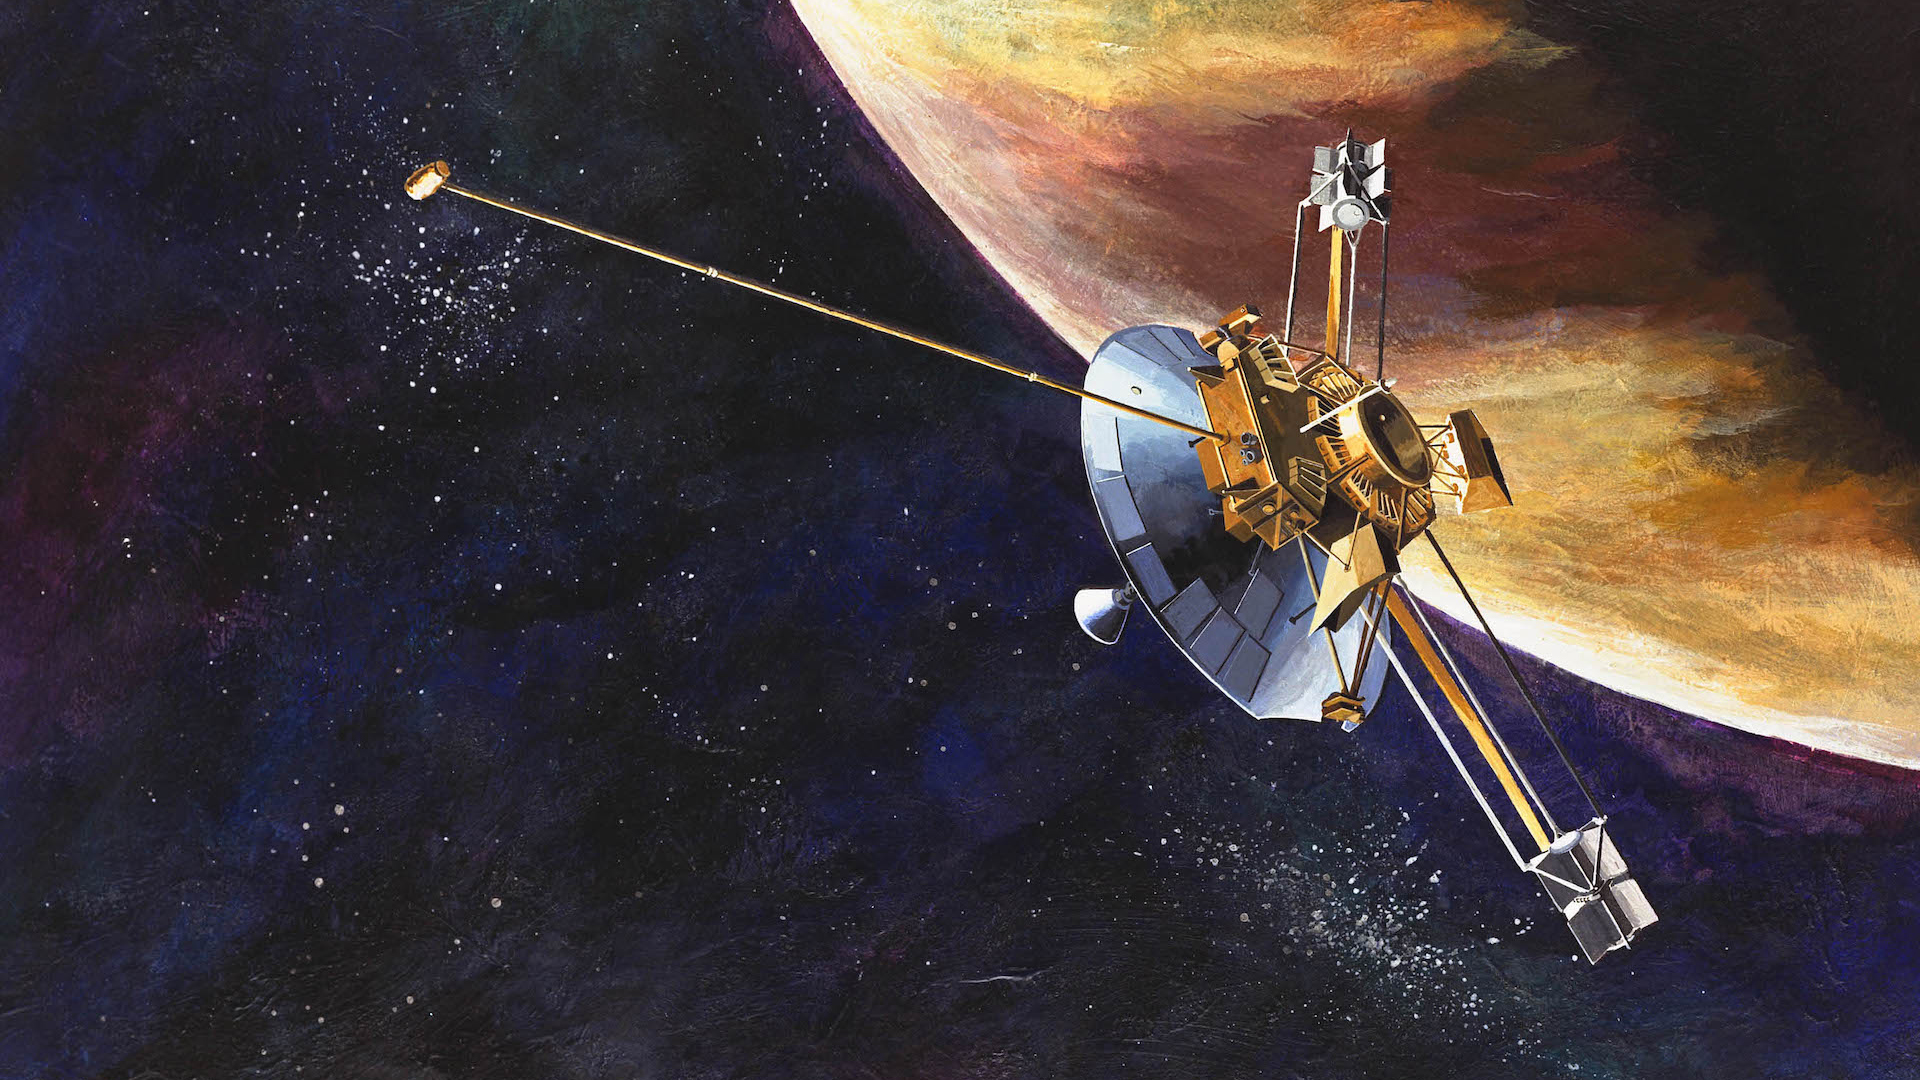 Illustration of the Pioneer 10 unmanned spacecraft.